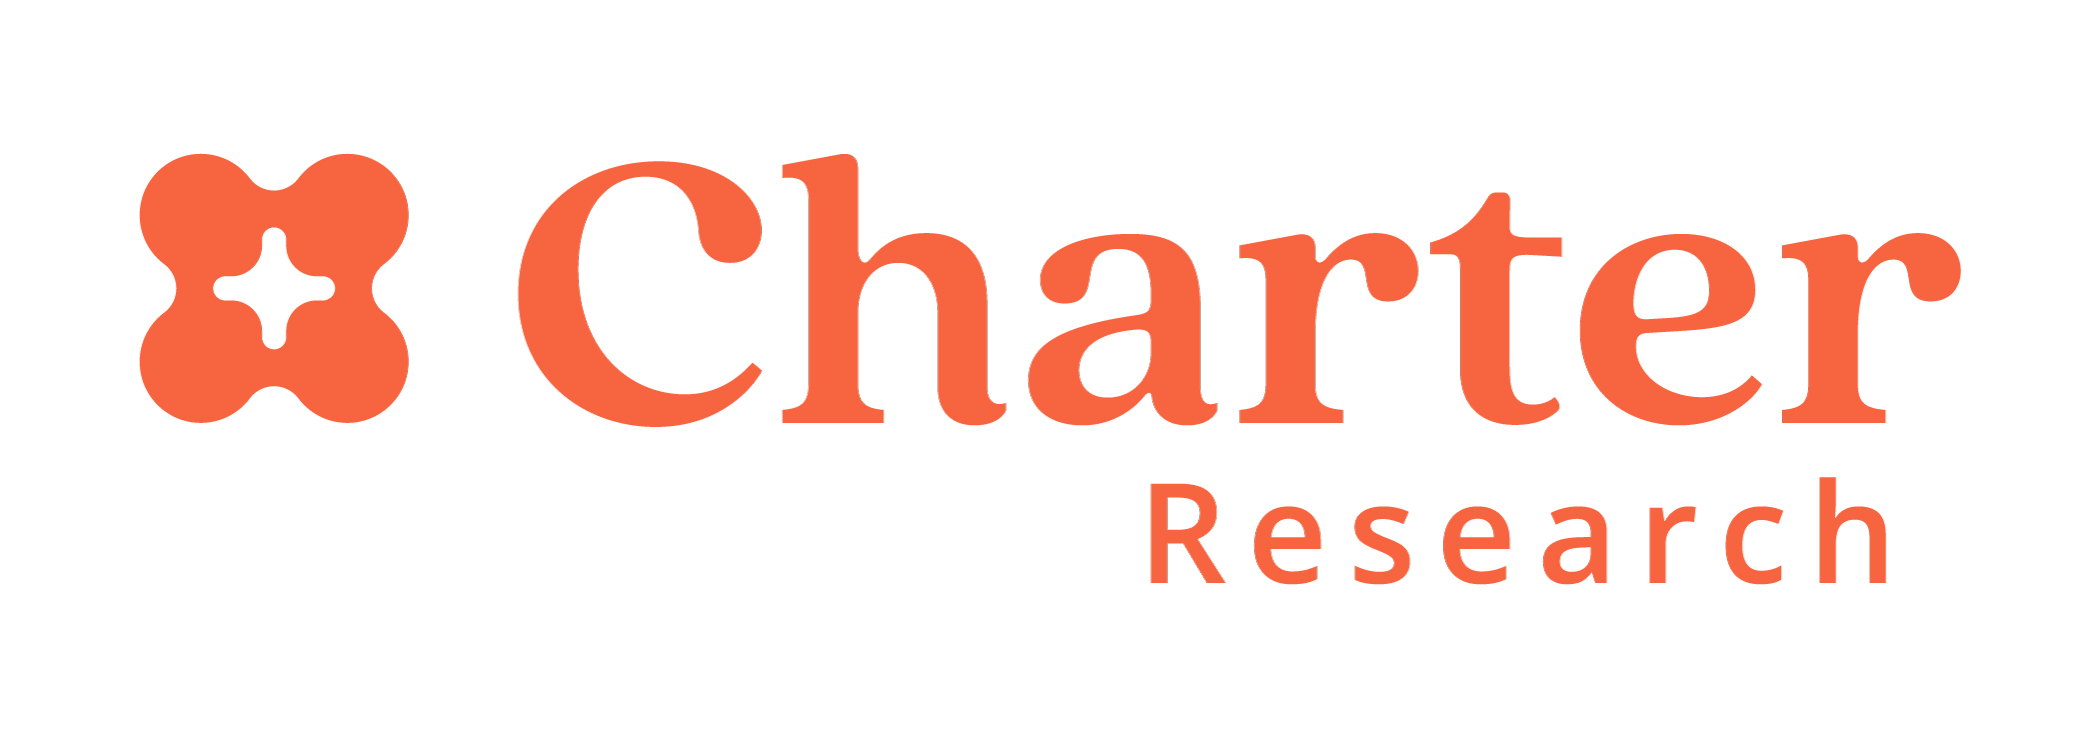 Charter Research logo